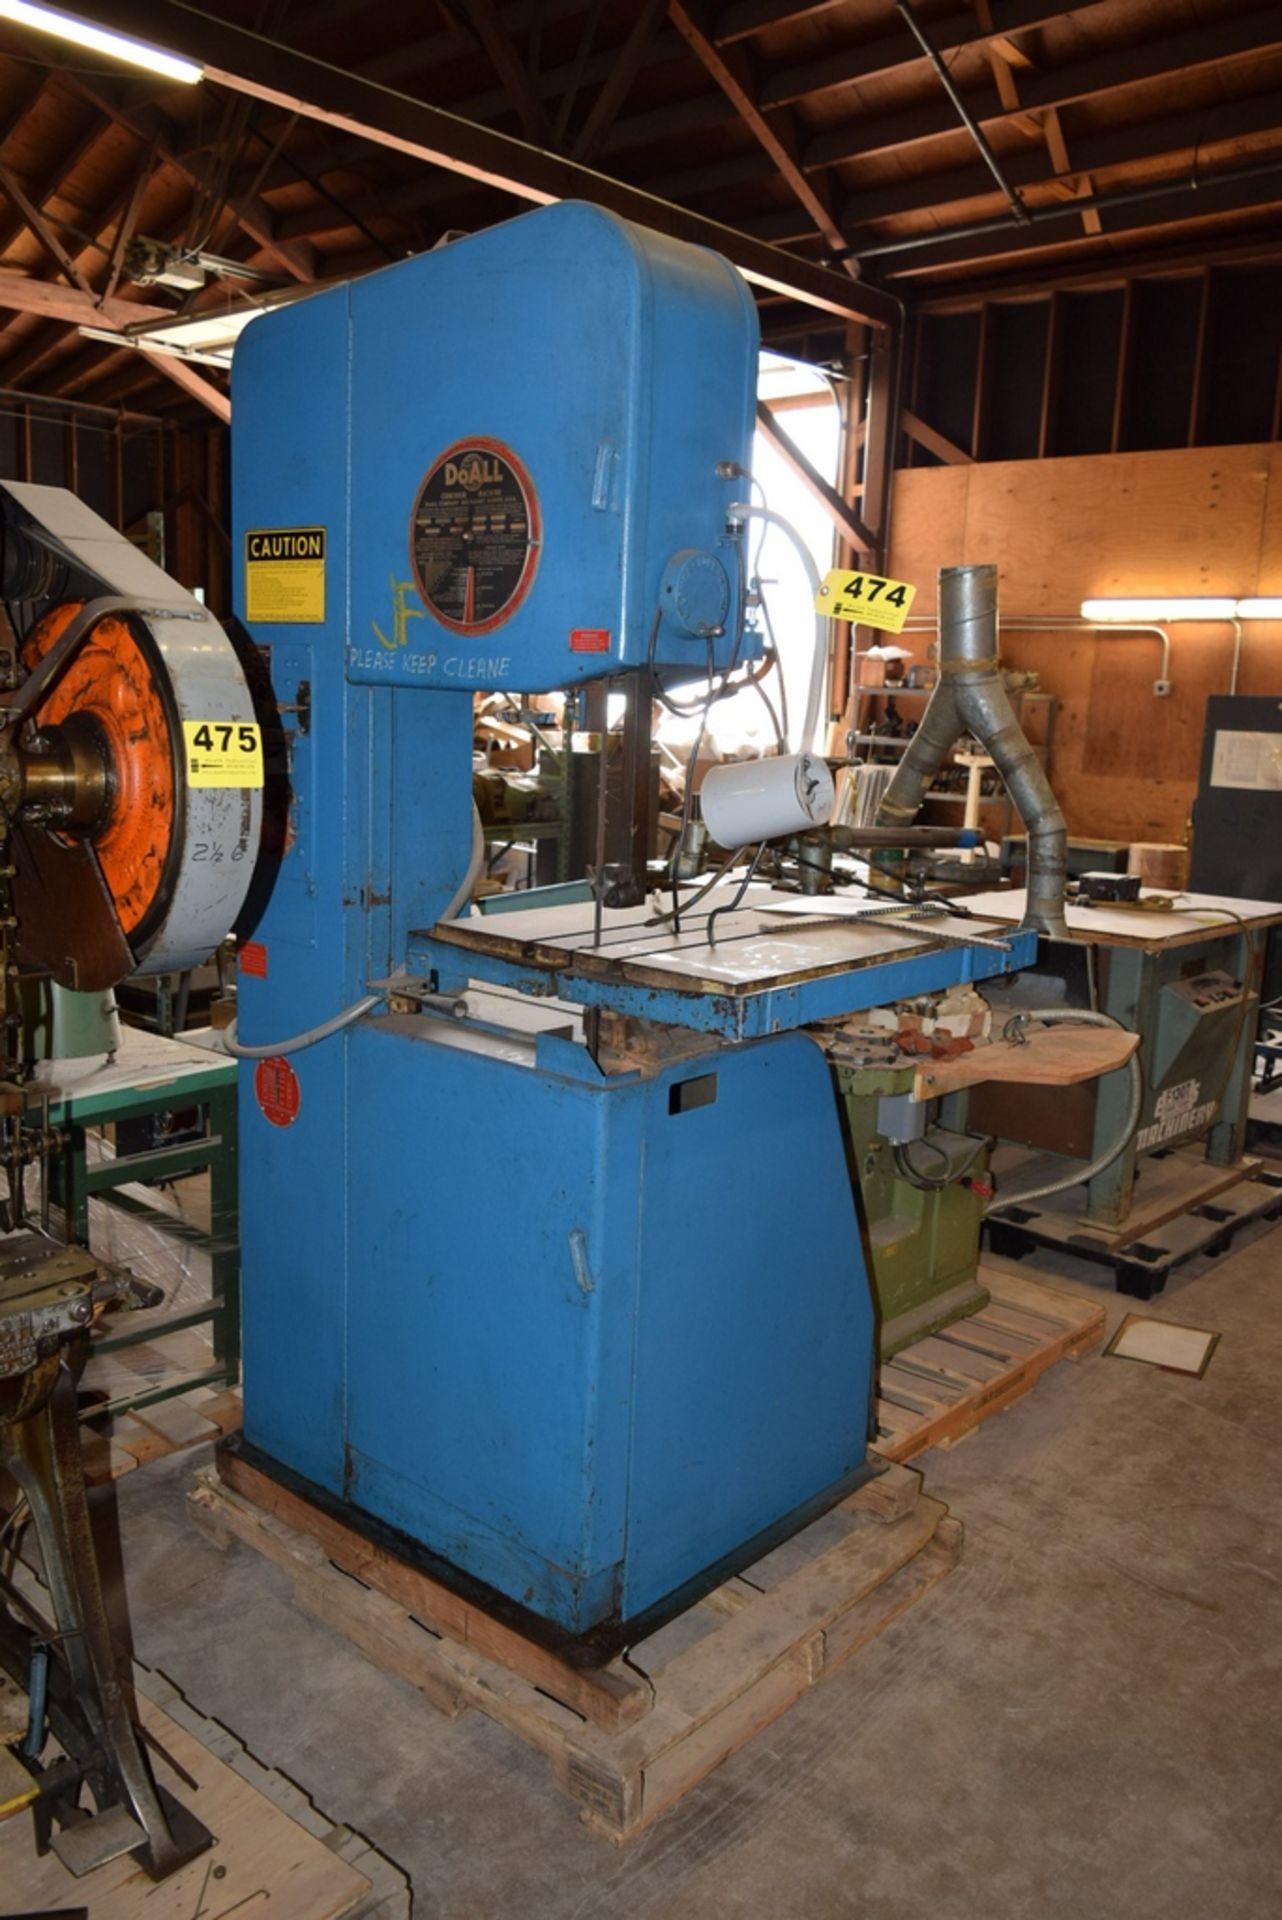 DOALL 20" MODEL 2012 VERTICAL BAND SAW, S/N 349-76276, WITH WELDER